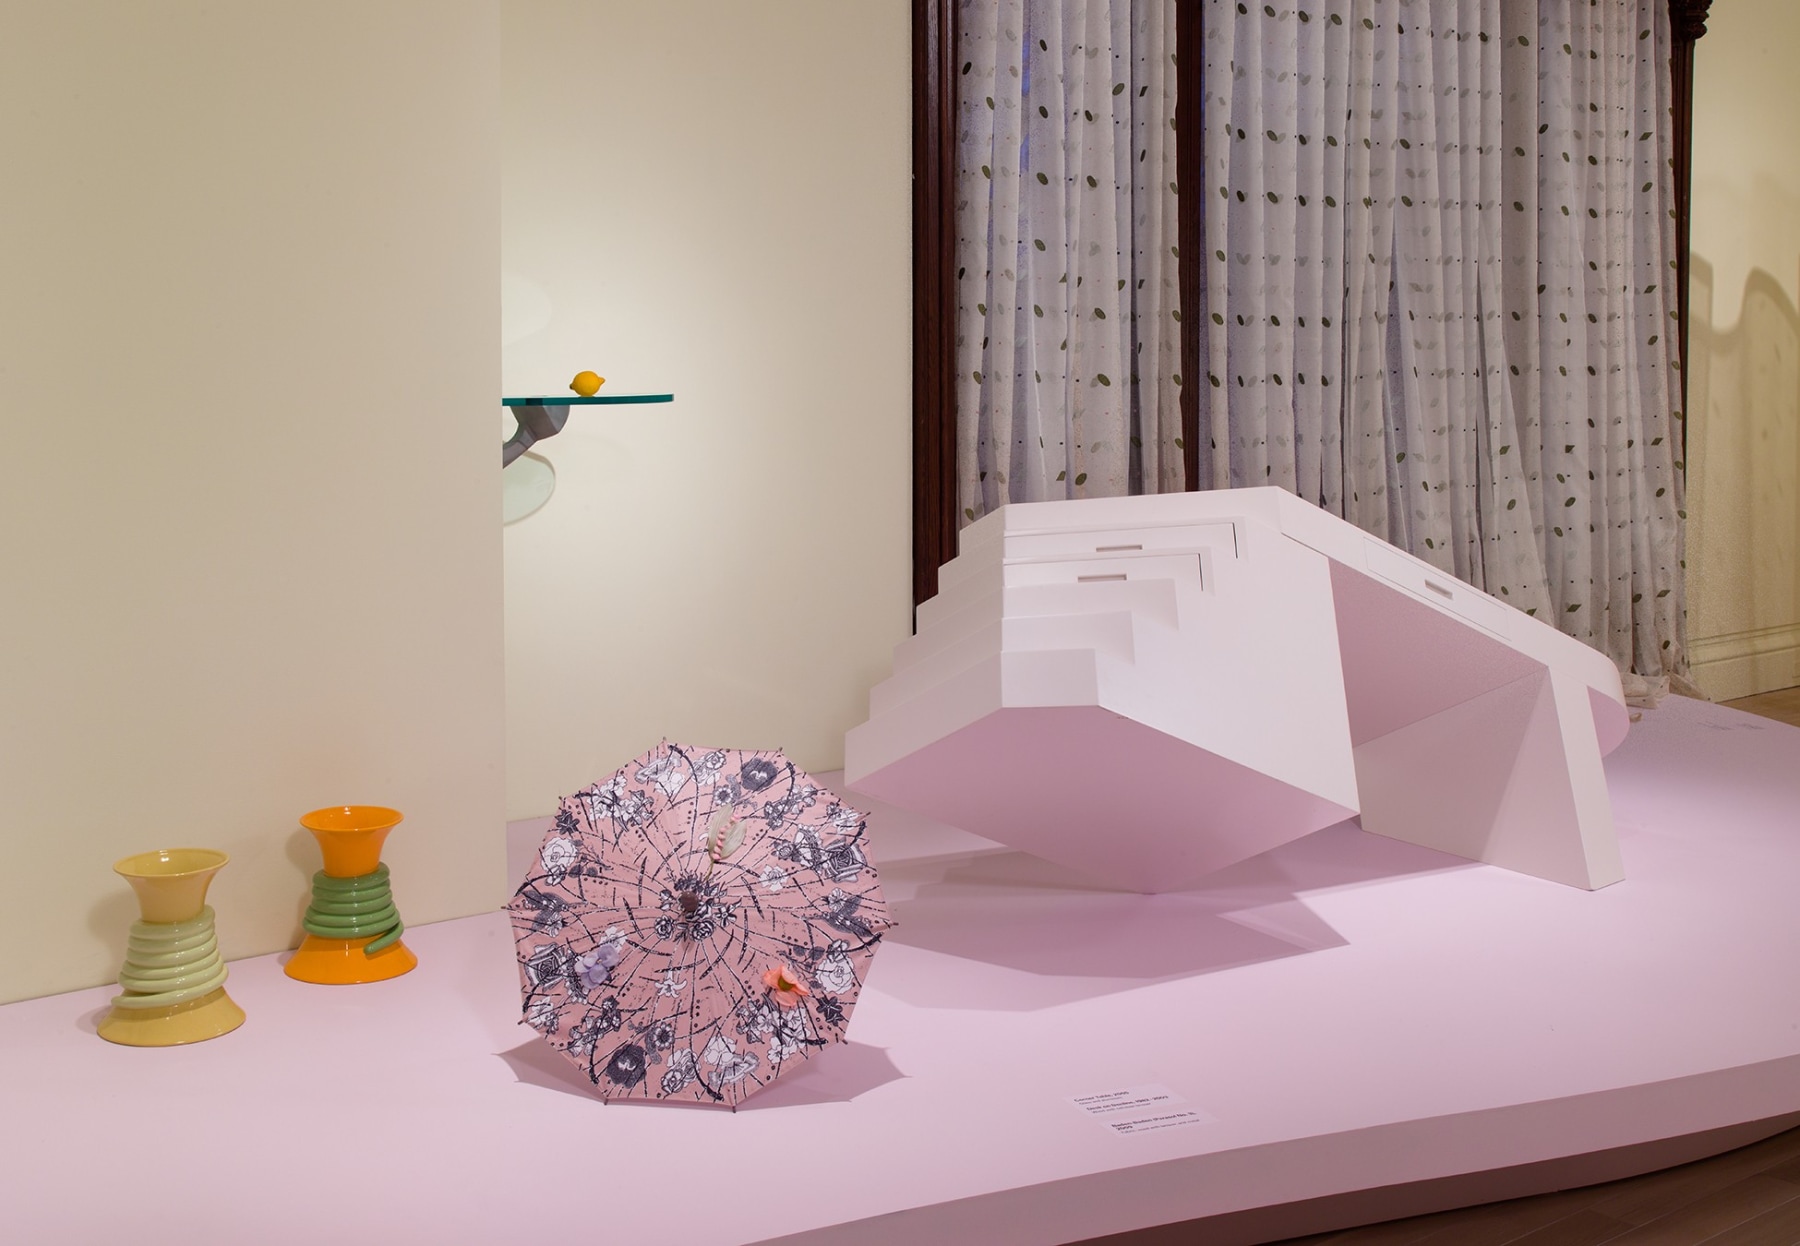 Marc Camille Chaimowicz,&nbsp;Marc Camille Chaimowicz: Your Place or Mine..., March 15 - August 6, 2018,&nbsp;The Jewish Museum, New York